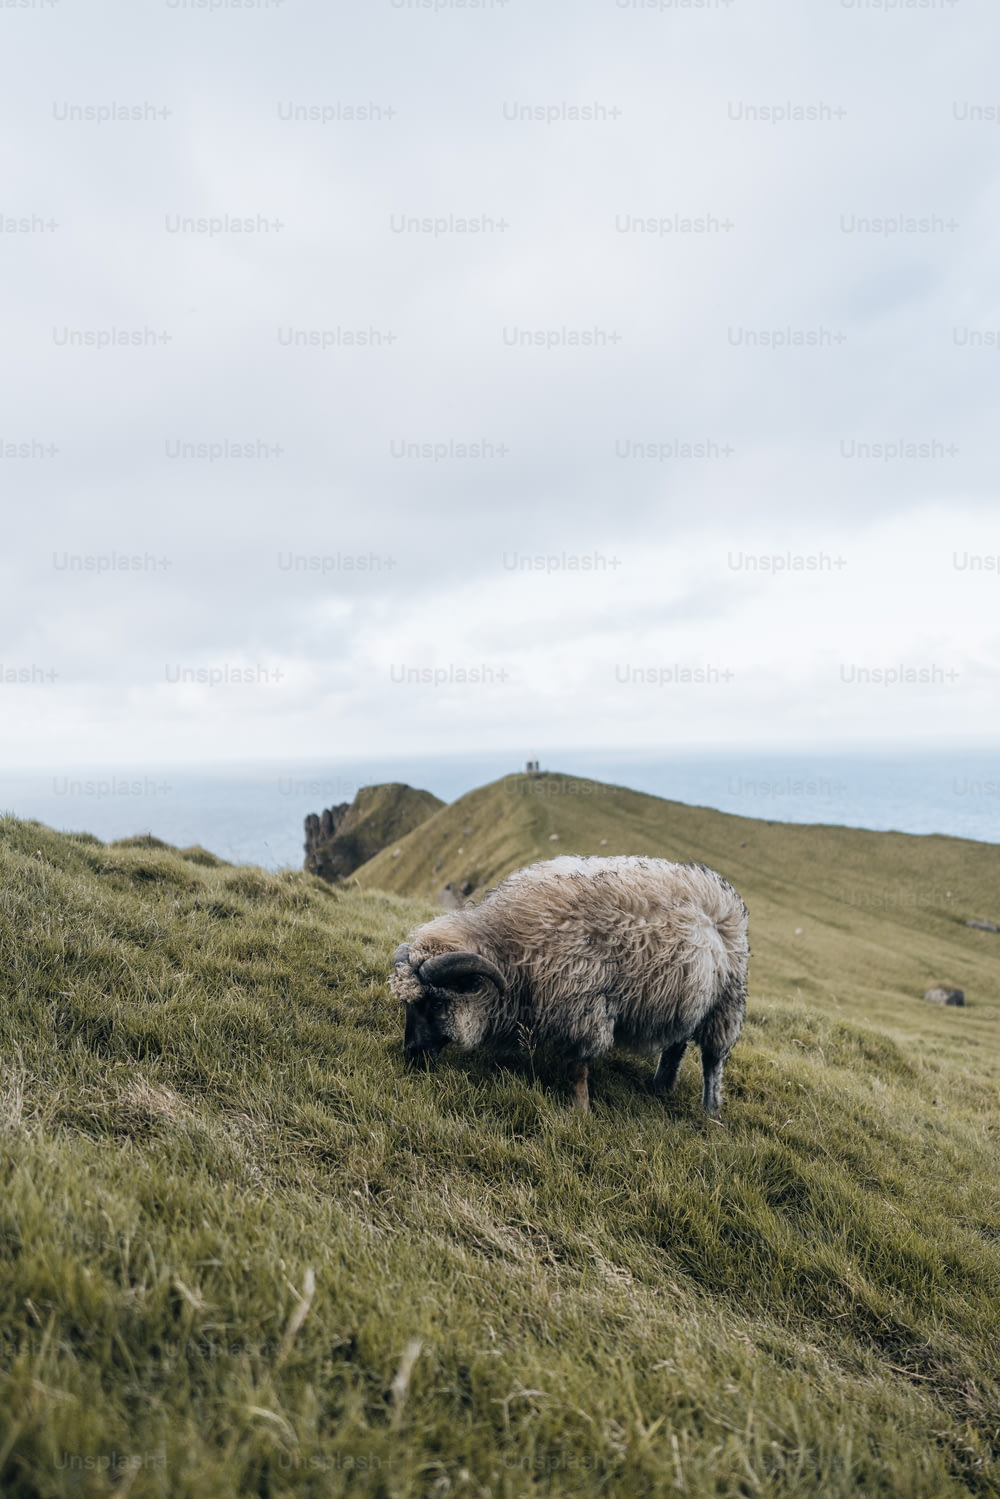 a sheep grazing in a grassy field on a cloudy day